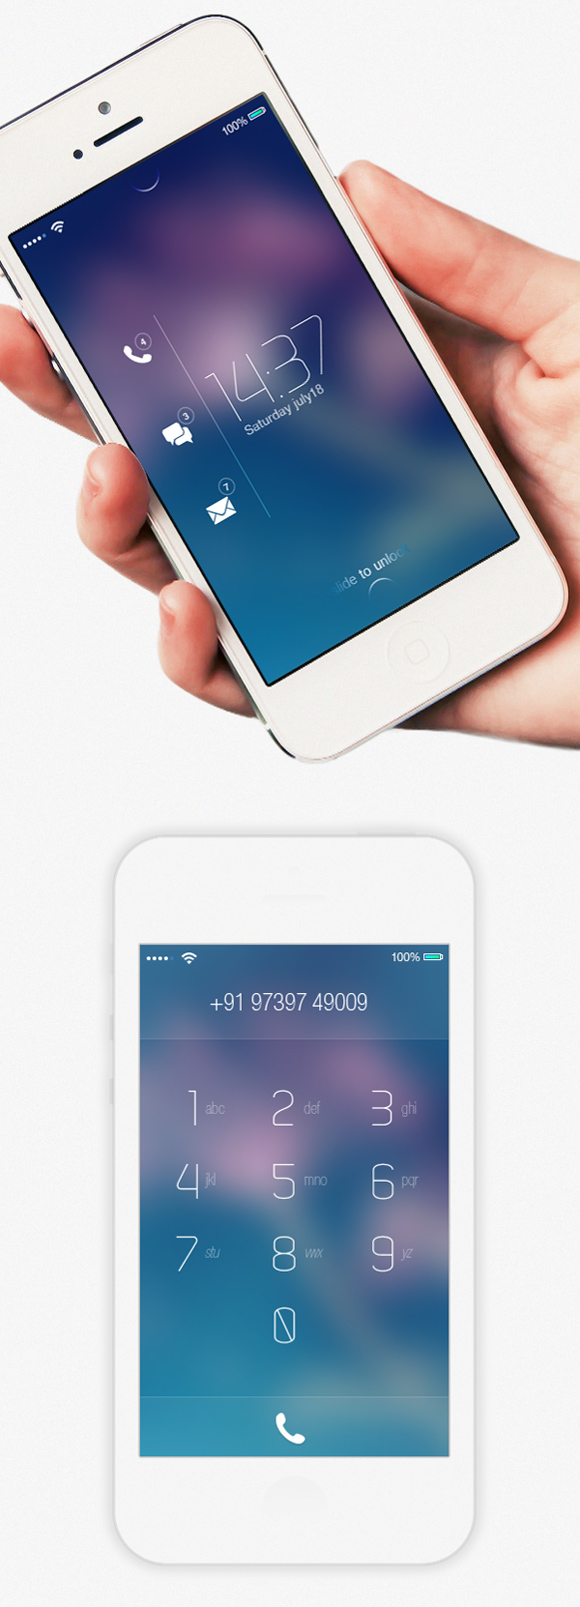 15 iOS 8 Design Concepts for Your Inspiration